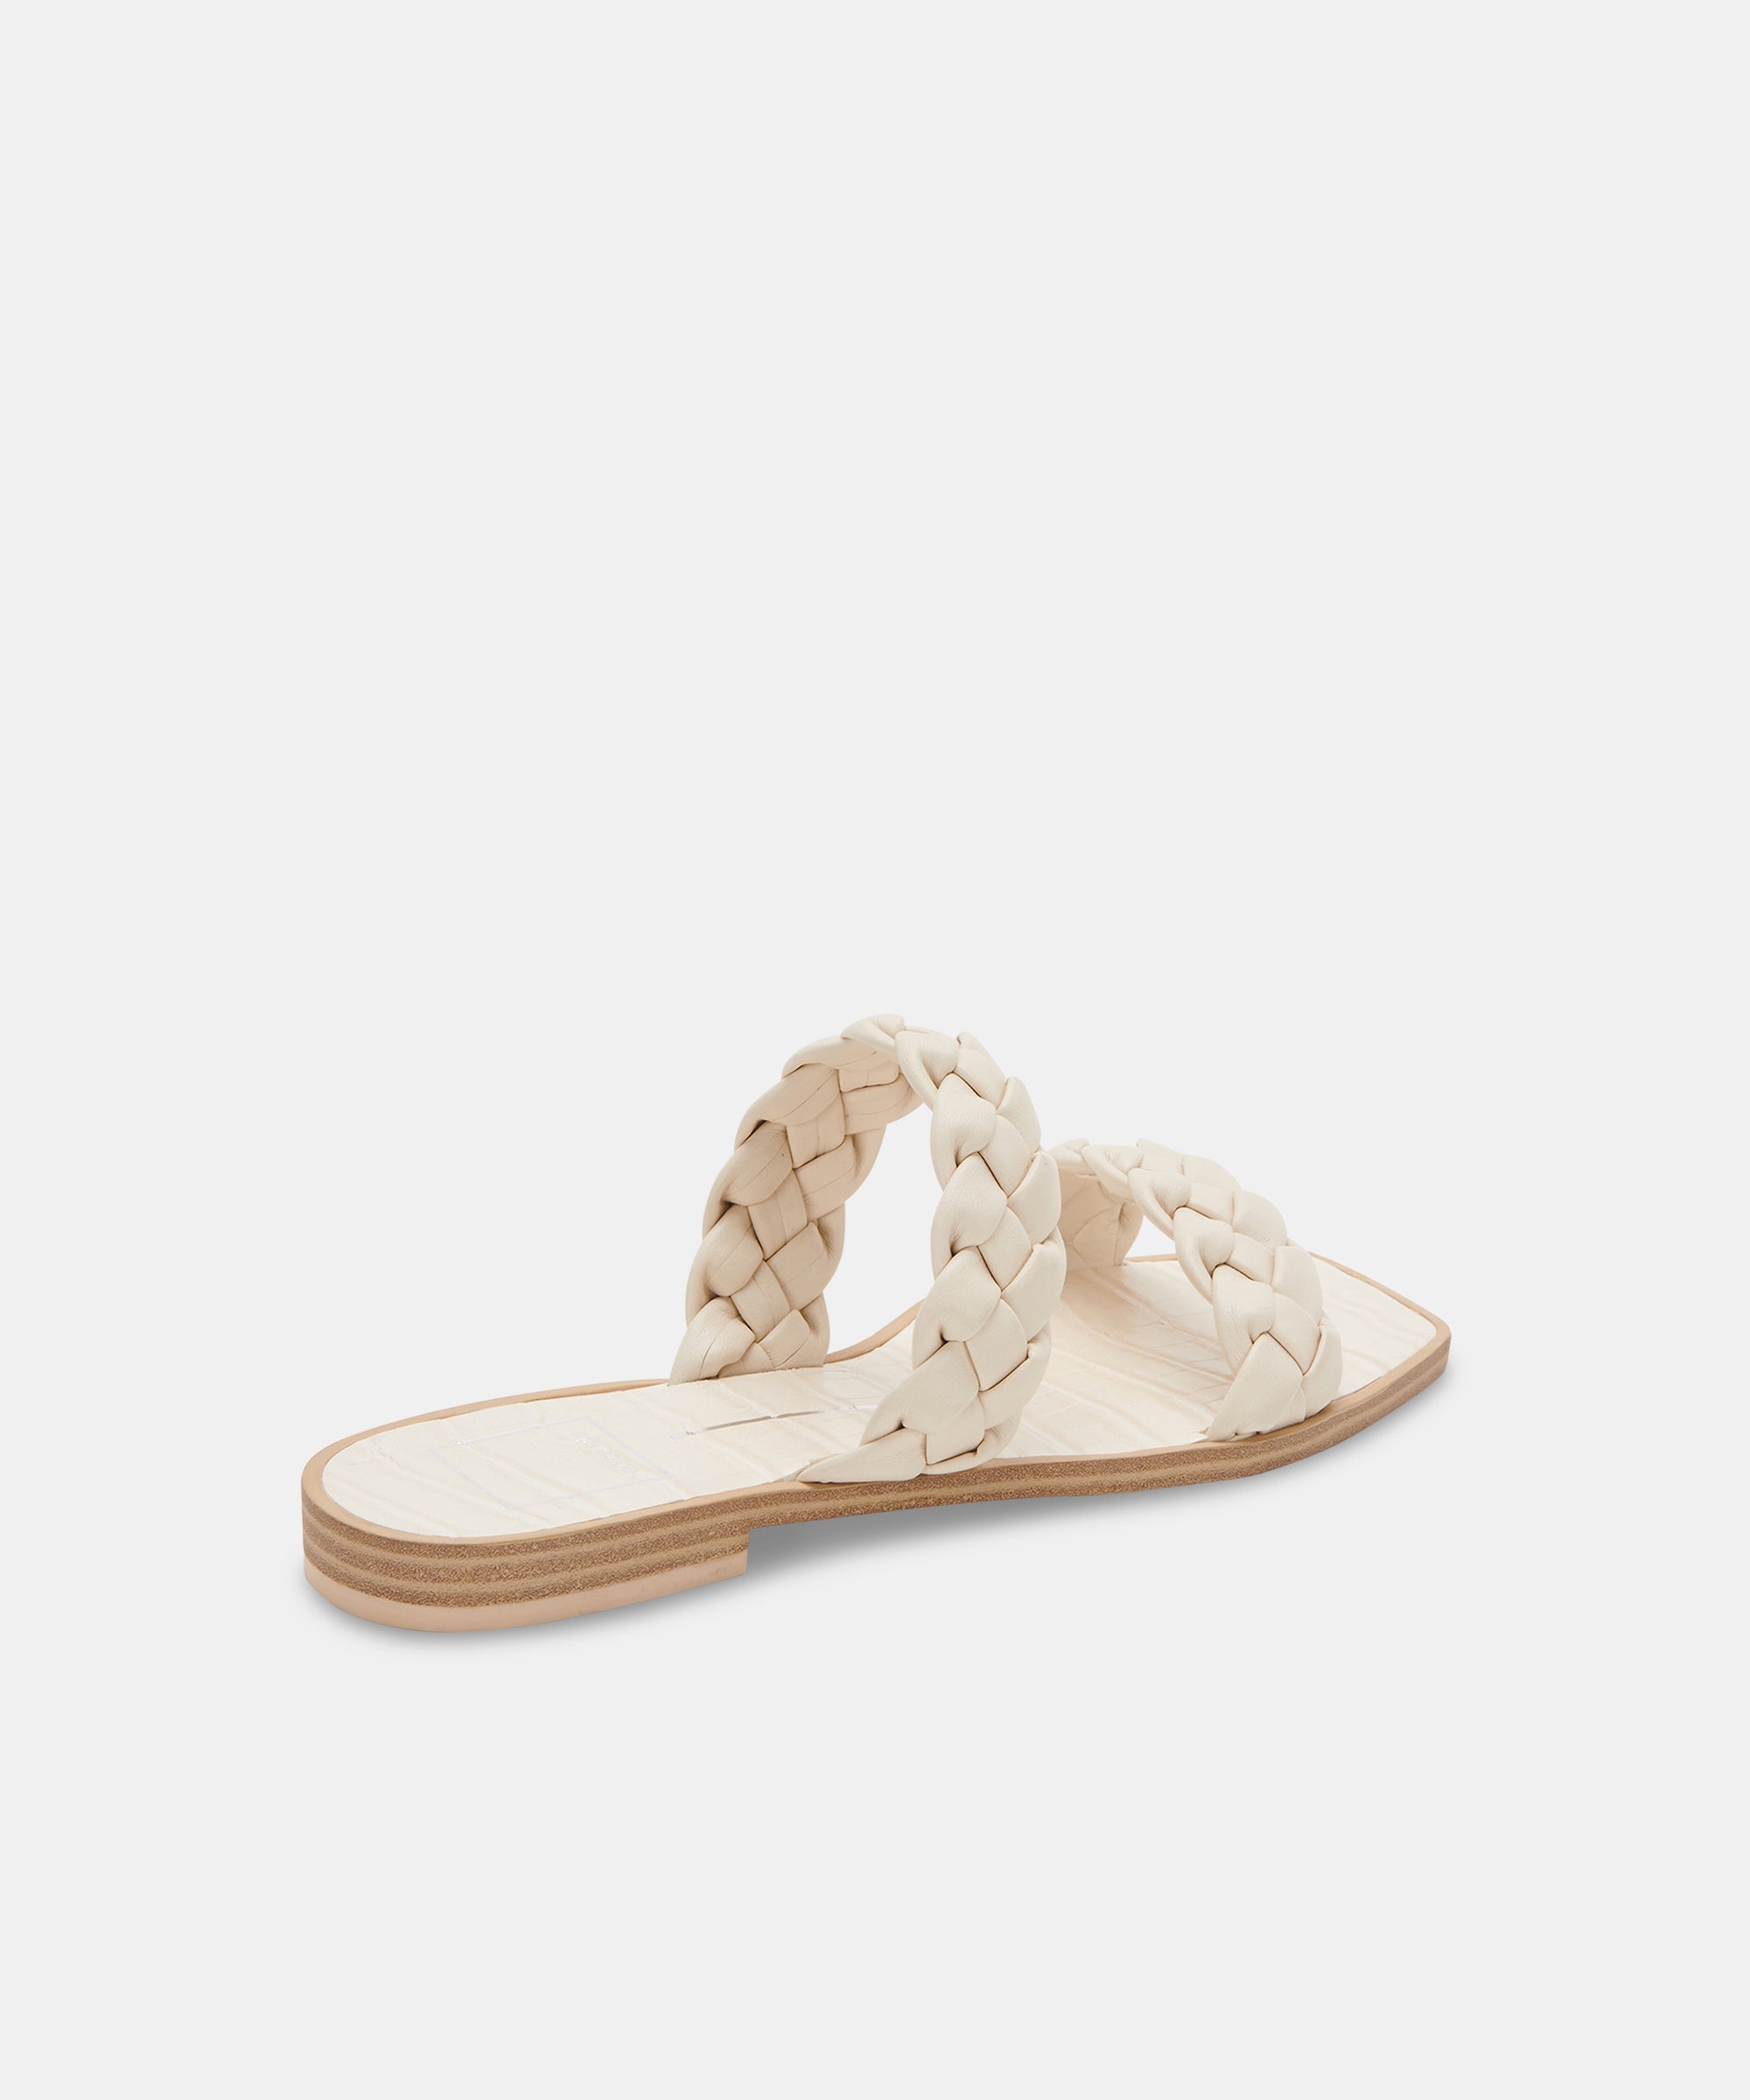 Indy Sandals in Ivory